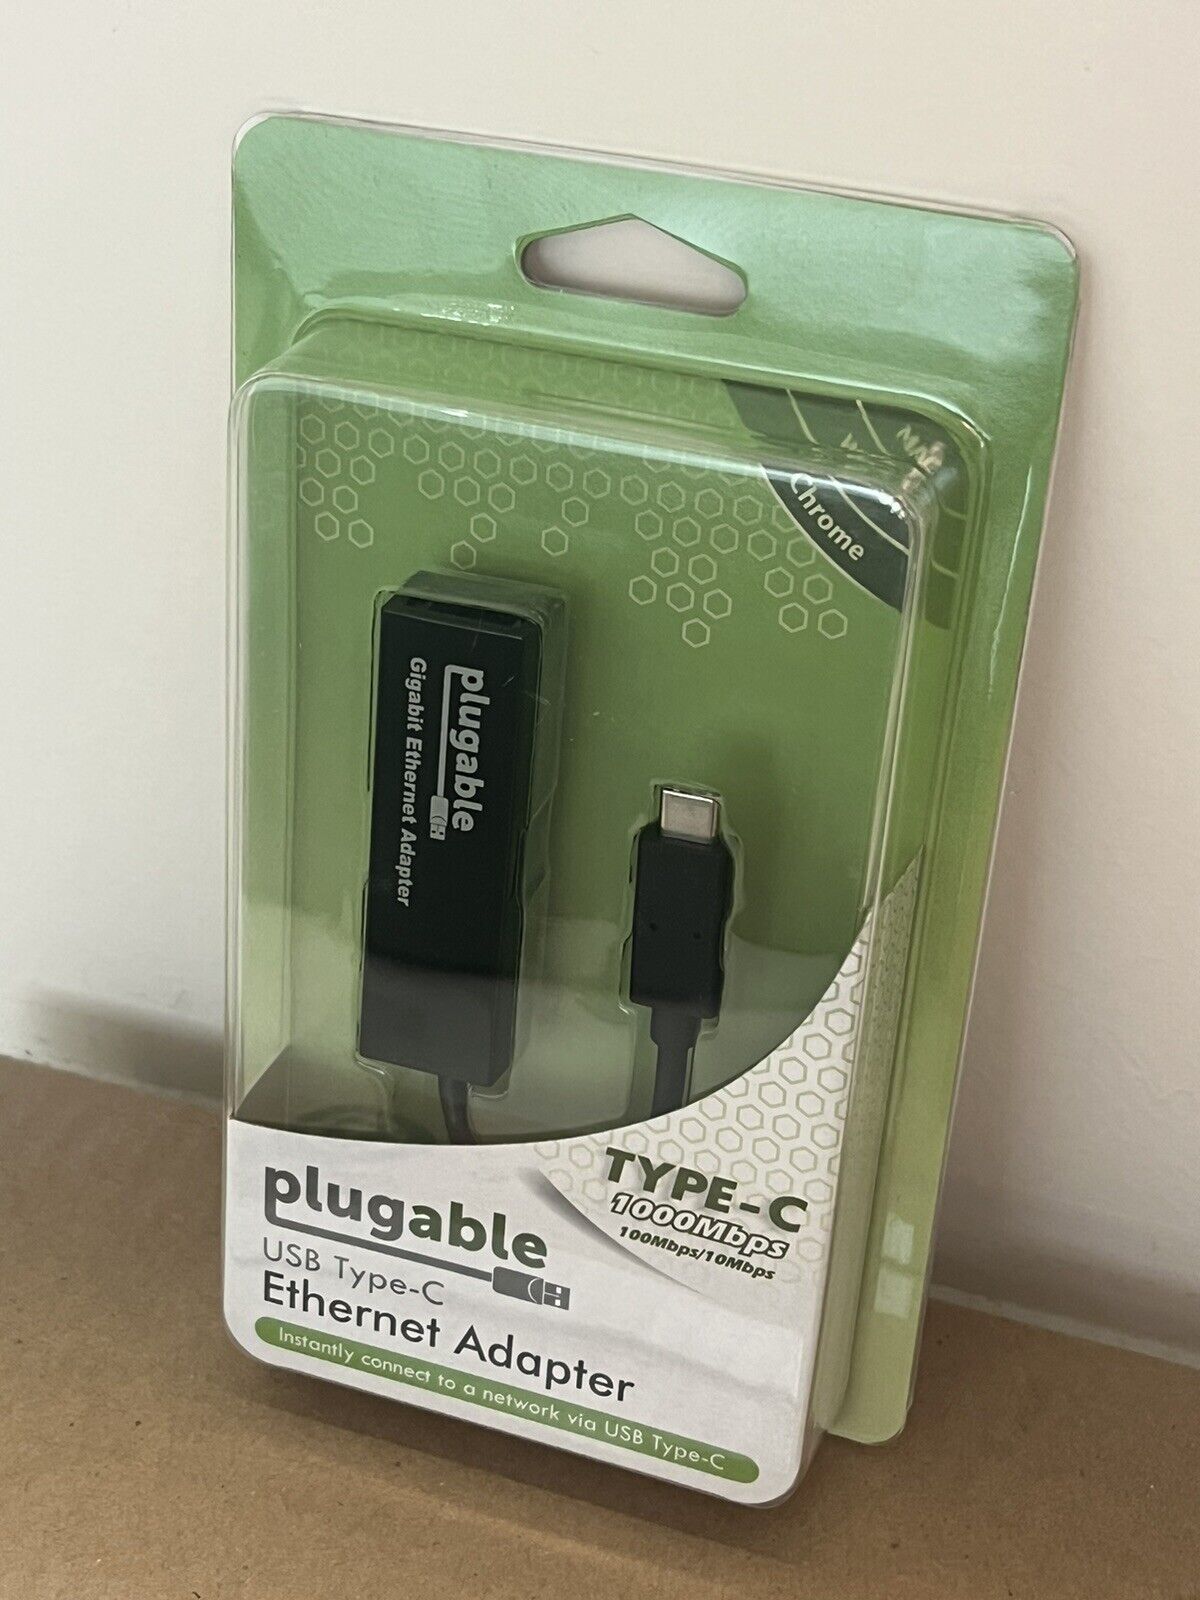 *NEW IN BOX * - Plugable USB C Eth. Adapter, Fast & Reliable Gigabit Connection